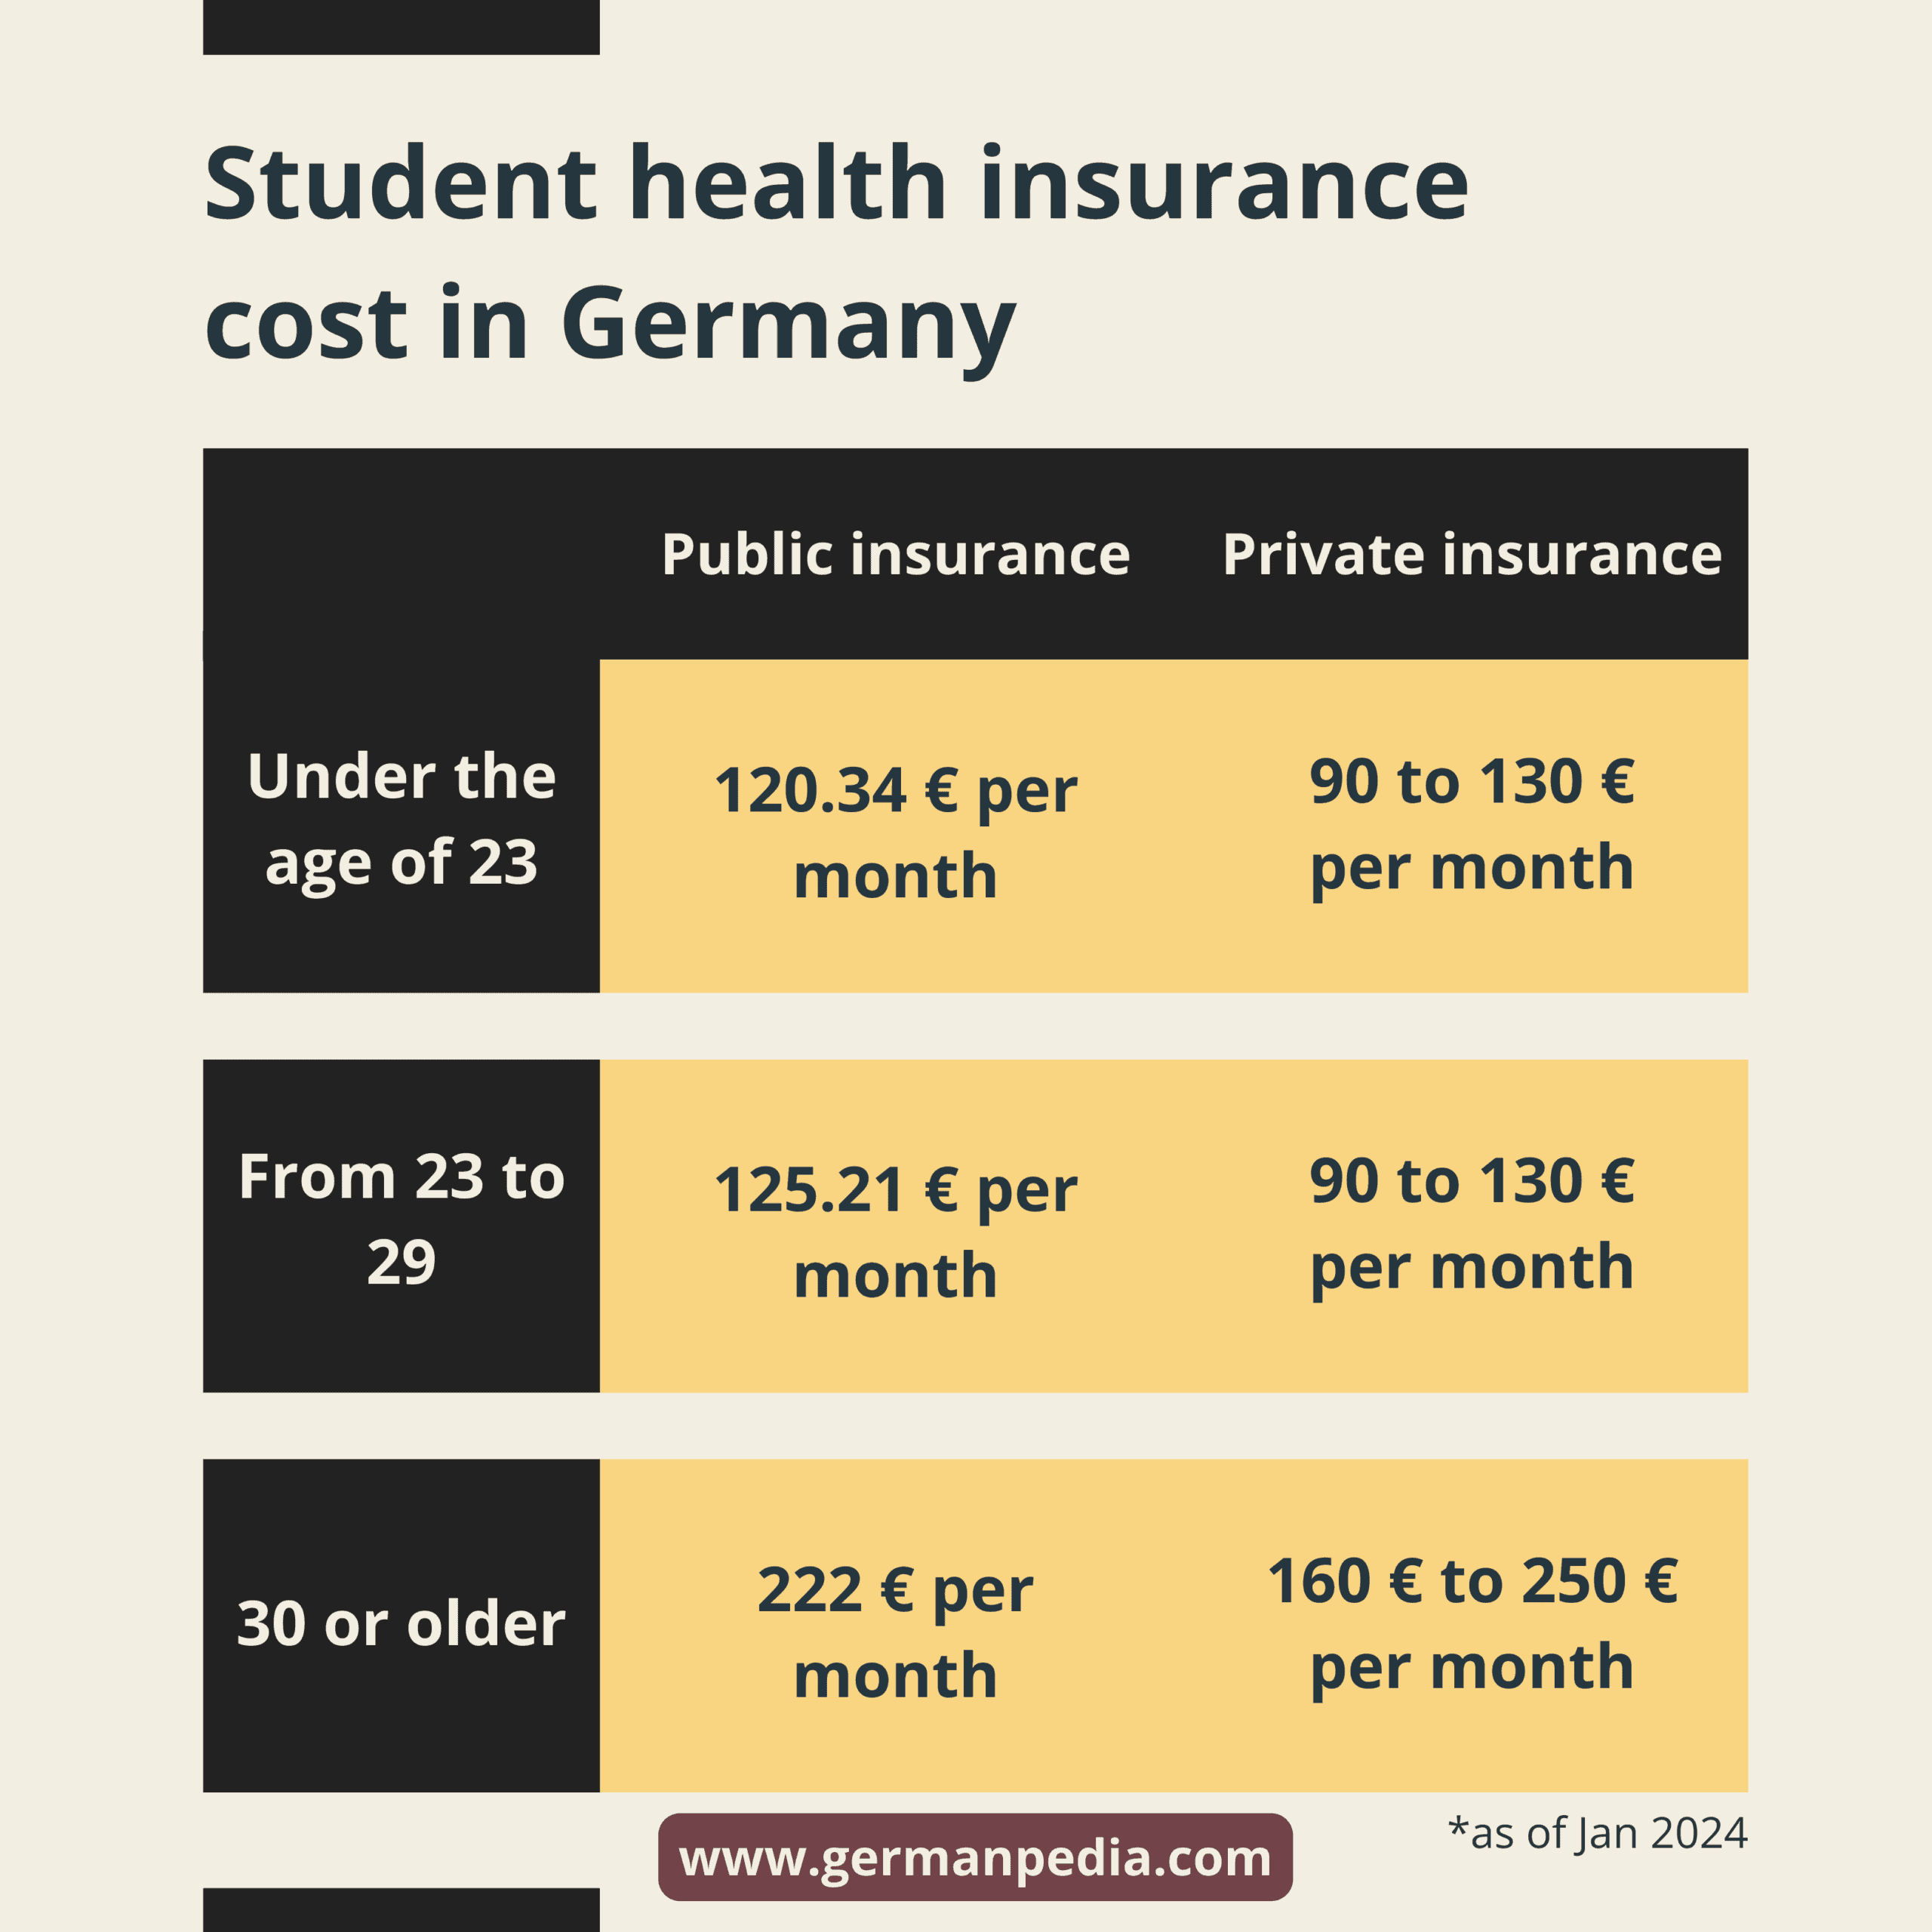 How much does international student health insurance cost in Germany?